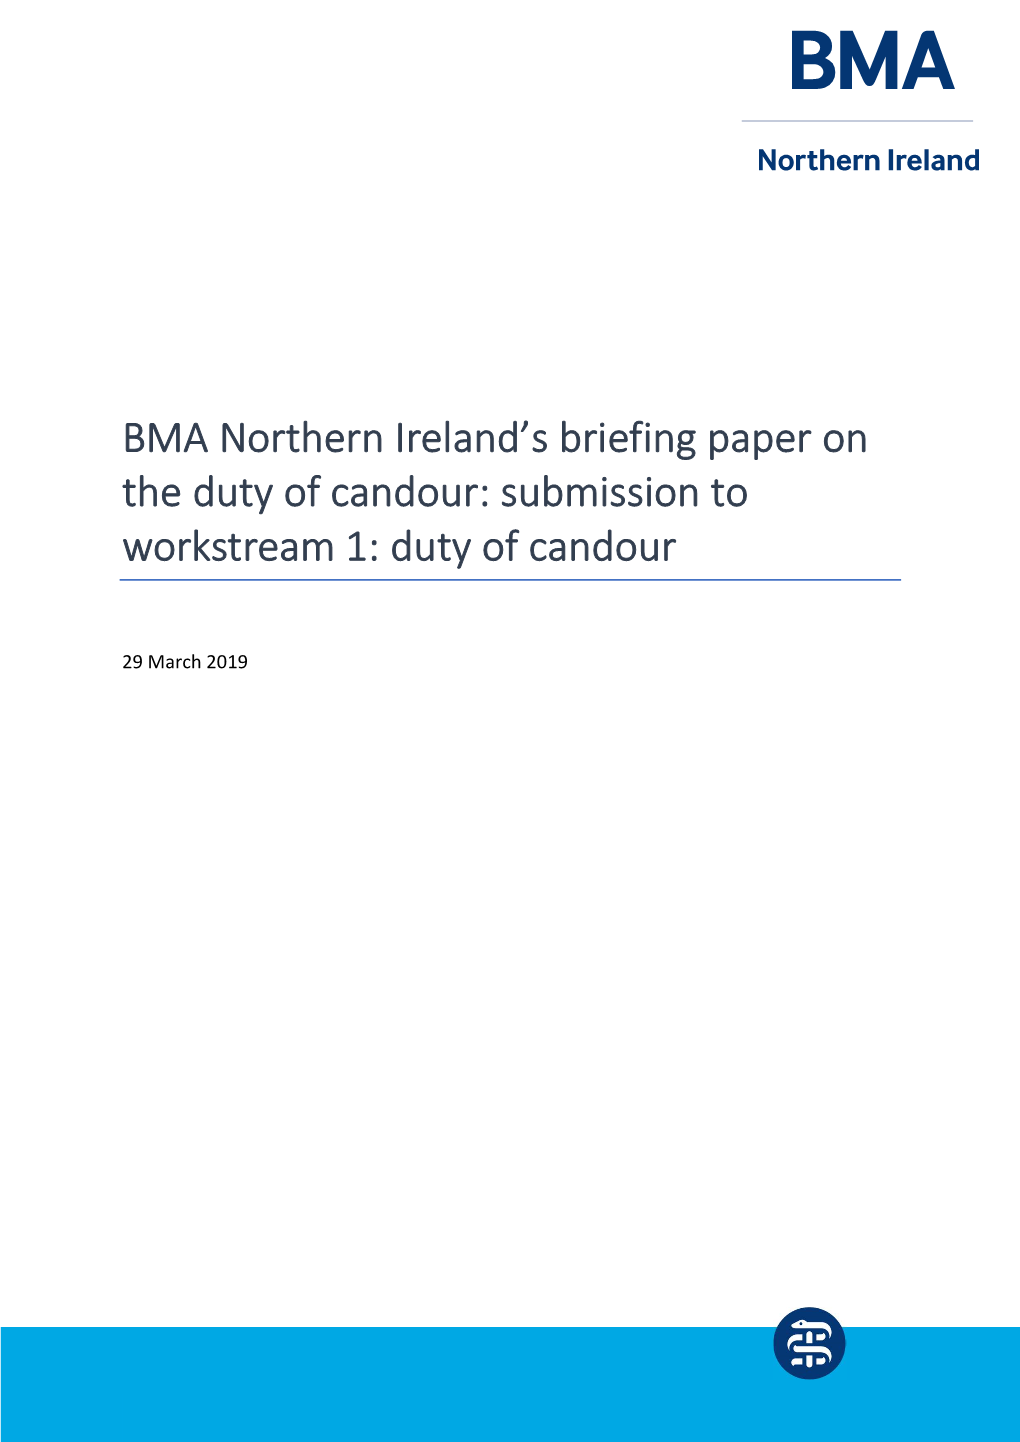 BMA Northern Ireland's Briefing Paper on the Duty of Candour